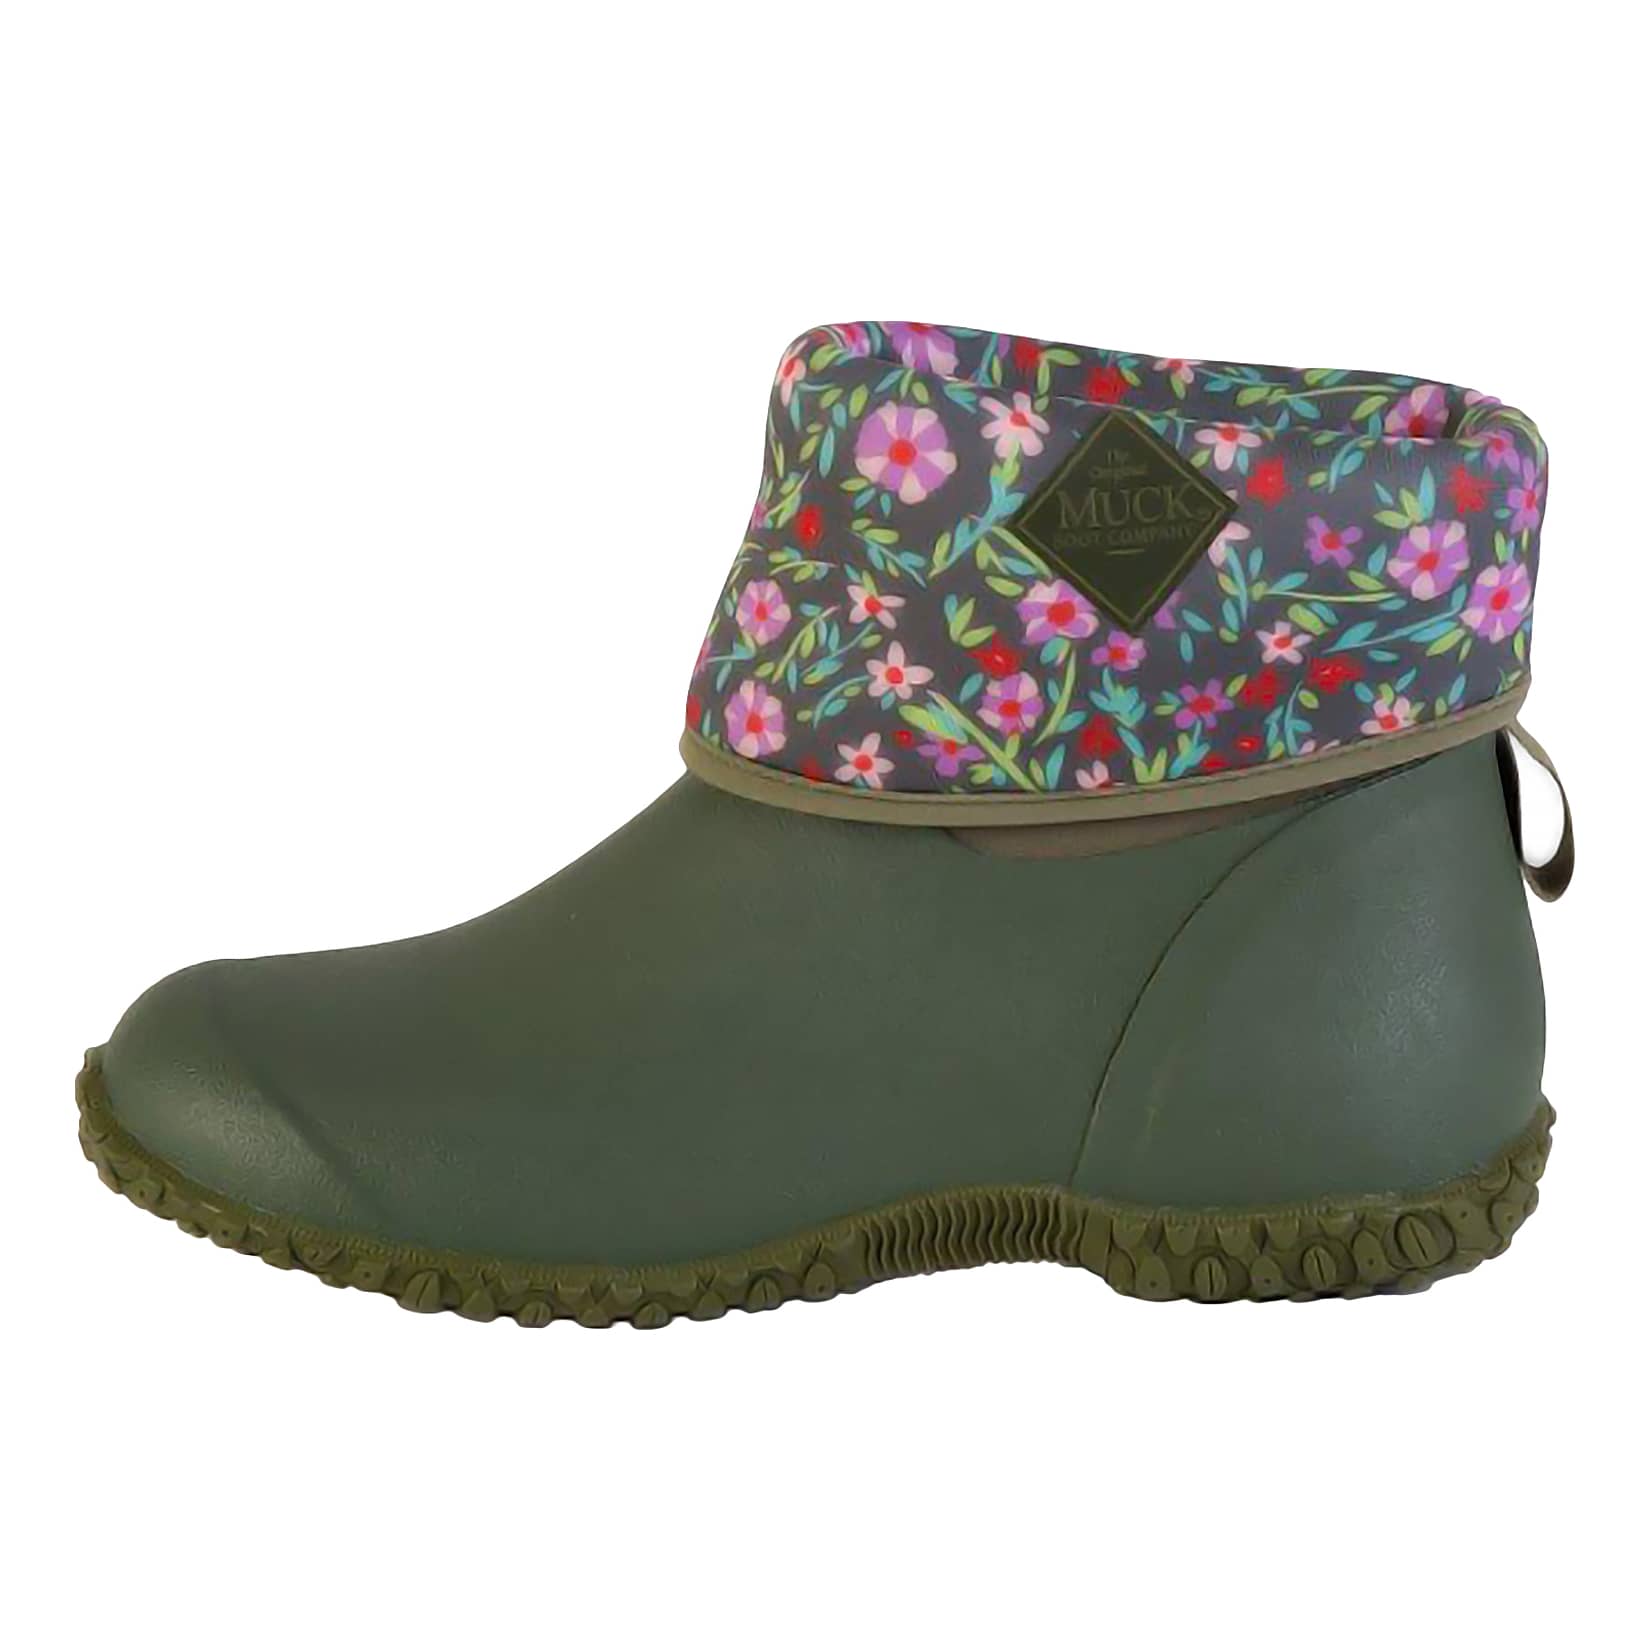 Muck® Women’s Muckster II Mid Boot - Green/Floral - rolled down